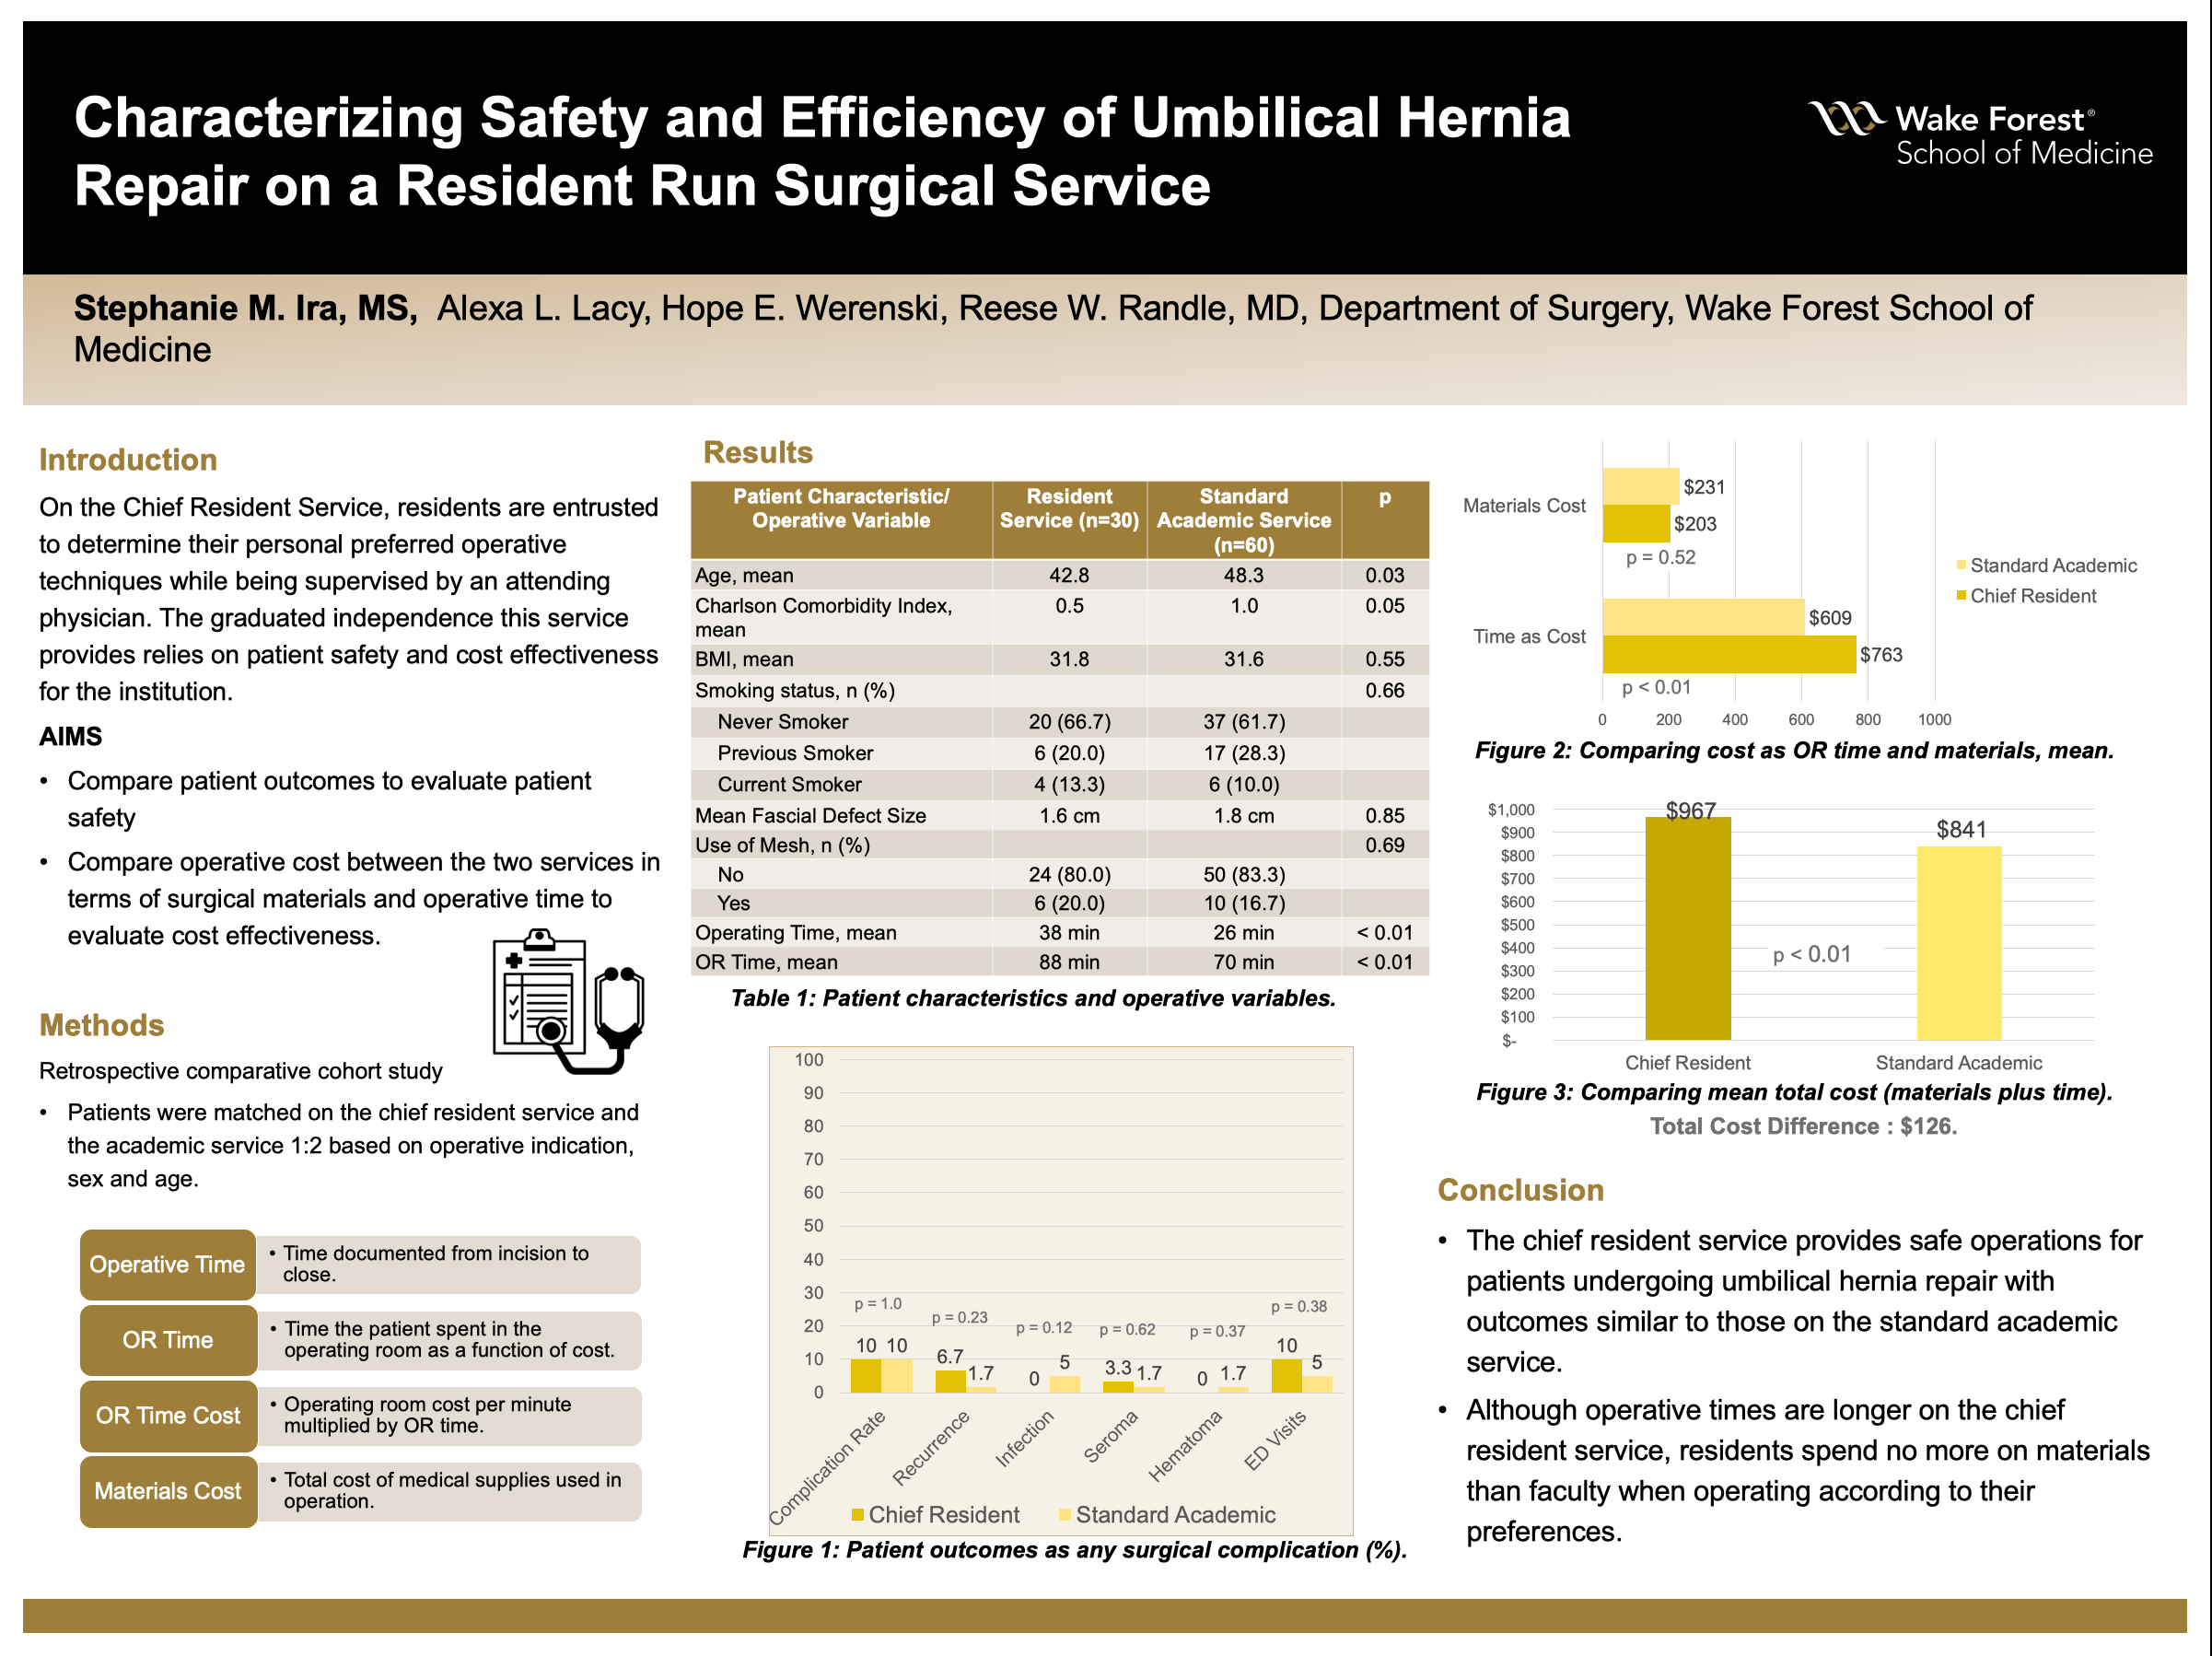 Showcase Image for Characterizing Safety and Efficiency of Umbilical Hernia Repair on a Resident Run Surgical Service